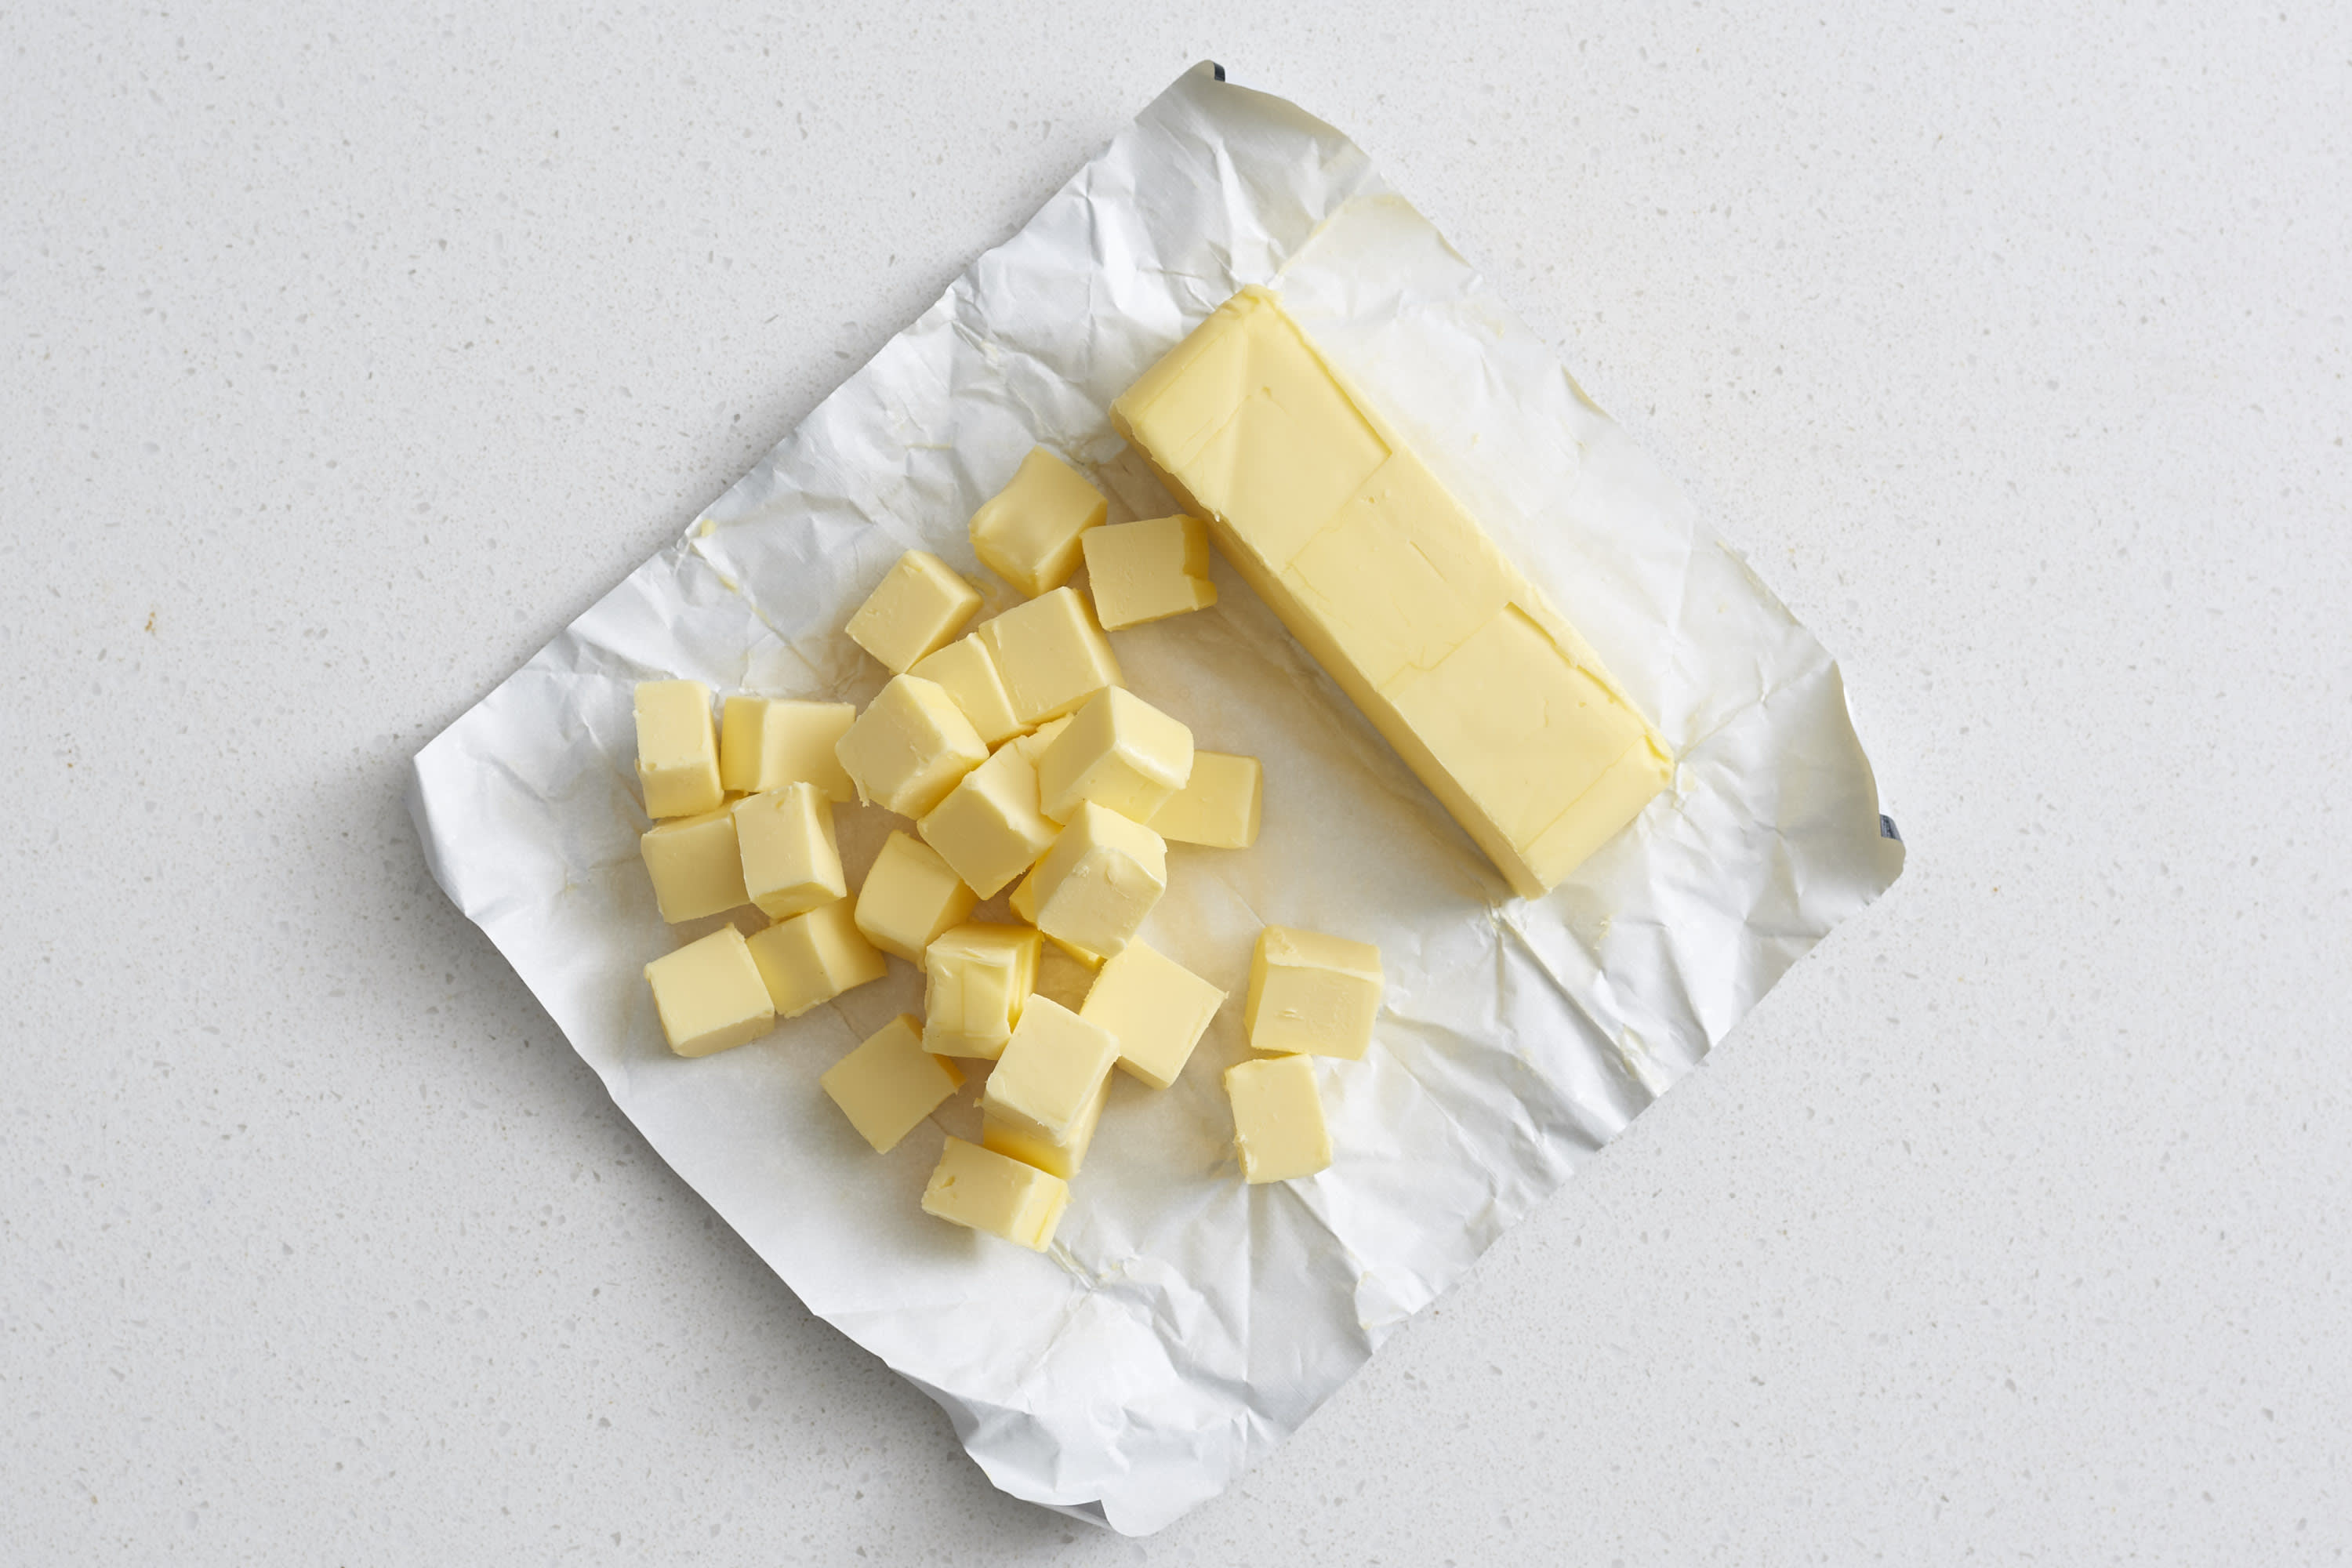 Kitchen Hack: How to Soften Butter in 10 Minutes - 2 Quick Ways